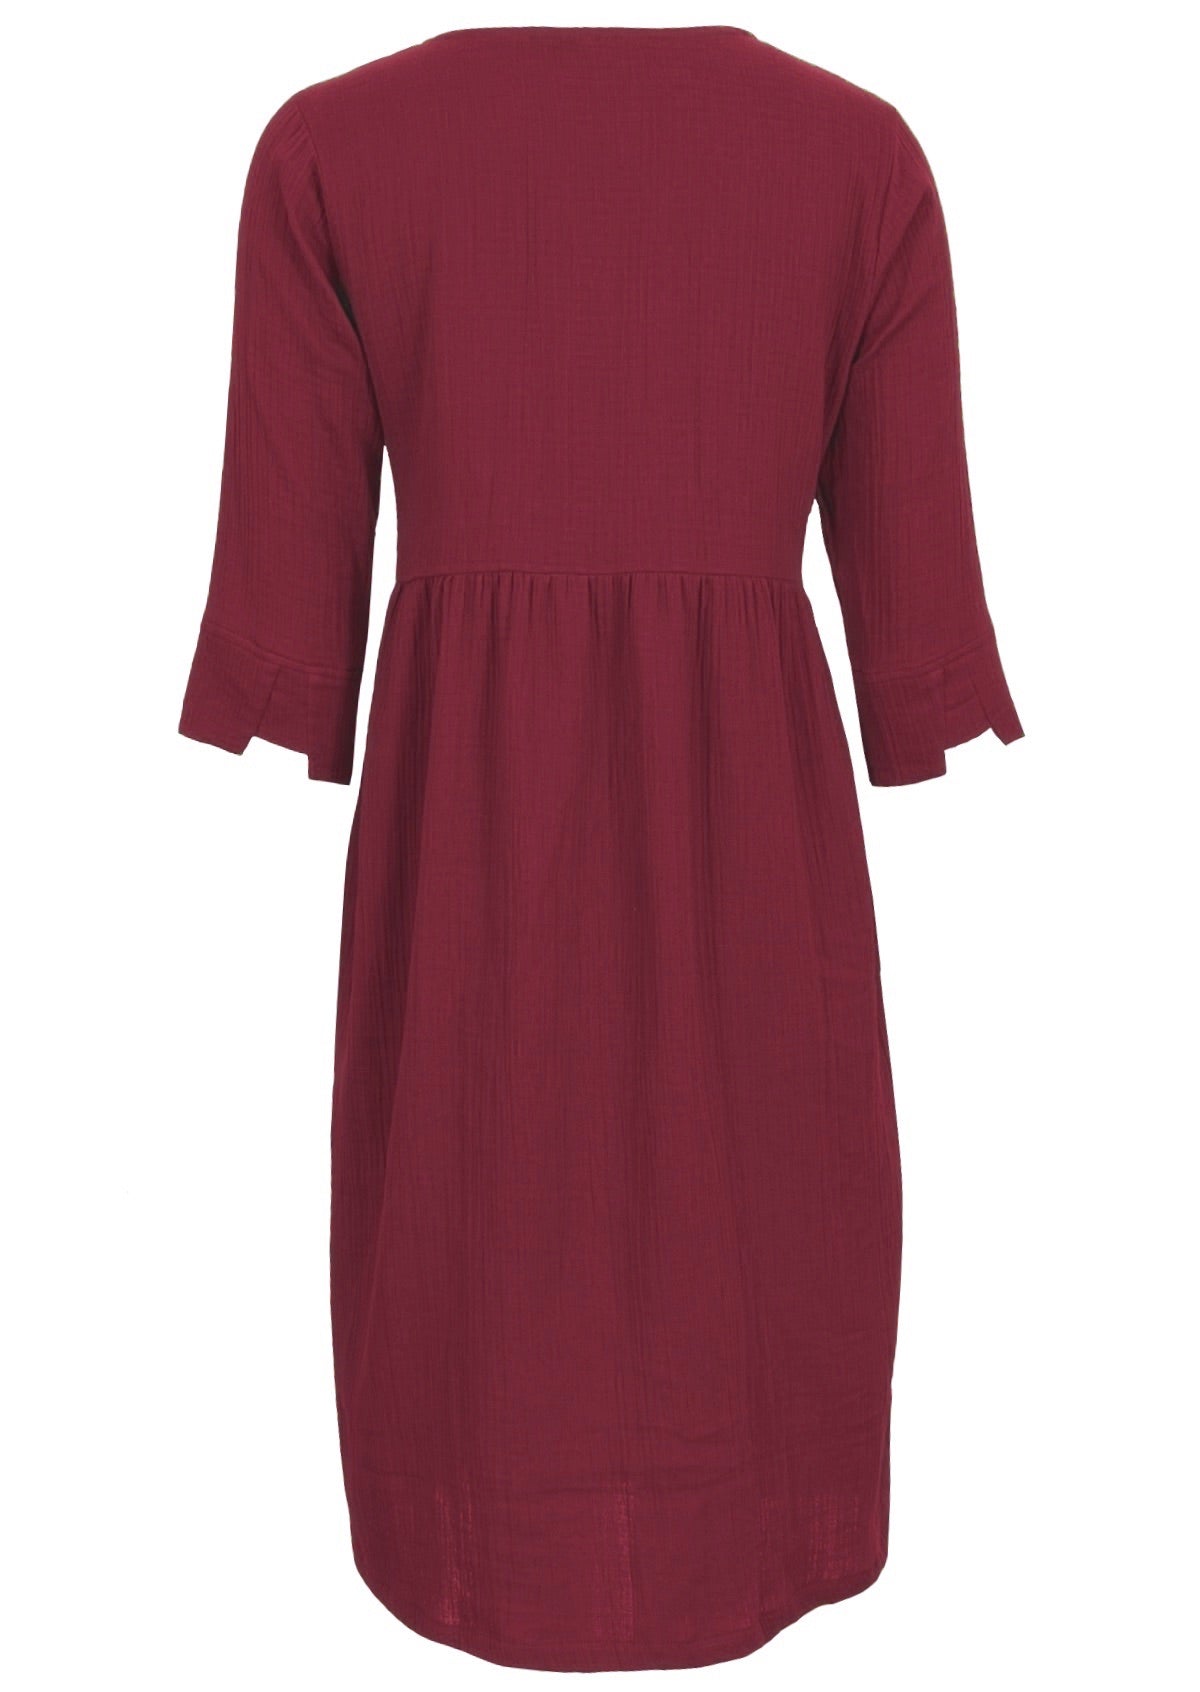 3/4 sleeves with cuff detail complete this comfortable and stylish cotton gauze dress